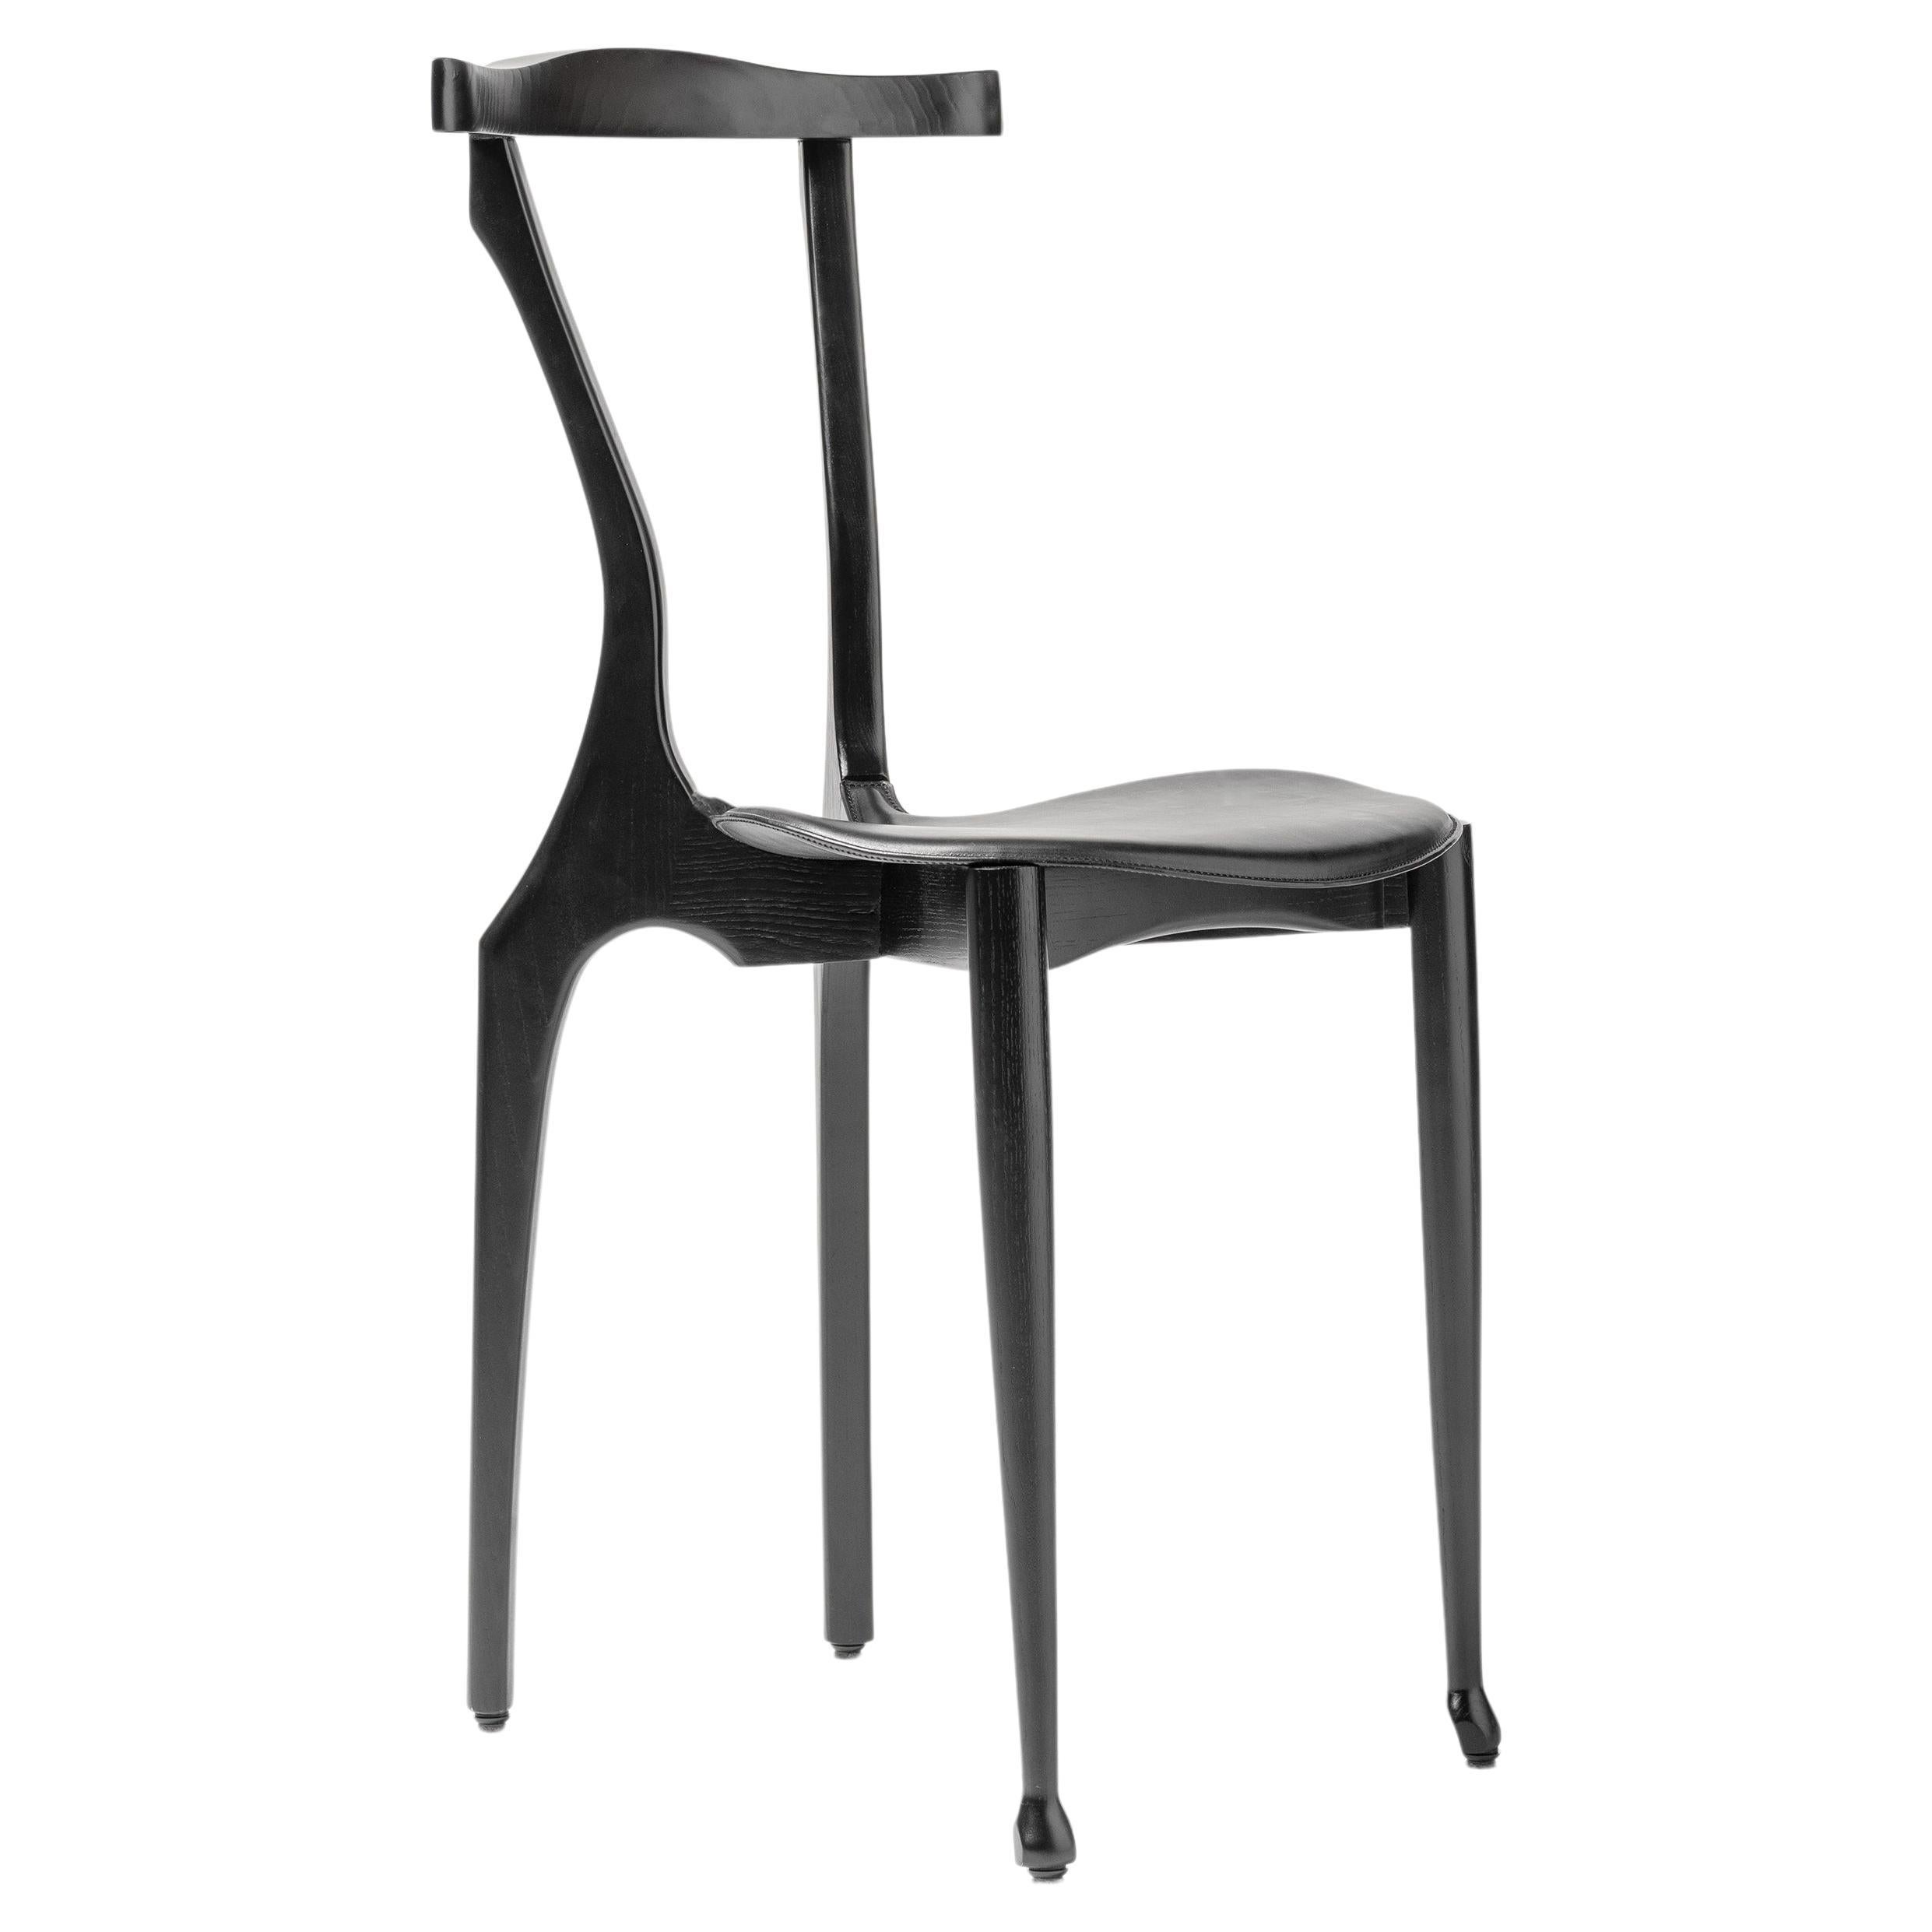 Black Lacquered Contemporary Gaulinetta Dining Chair by Oscar Tusquets, Gaulino  For Sale